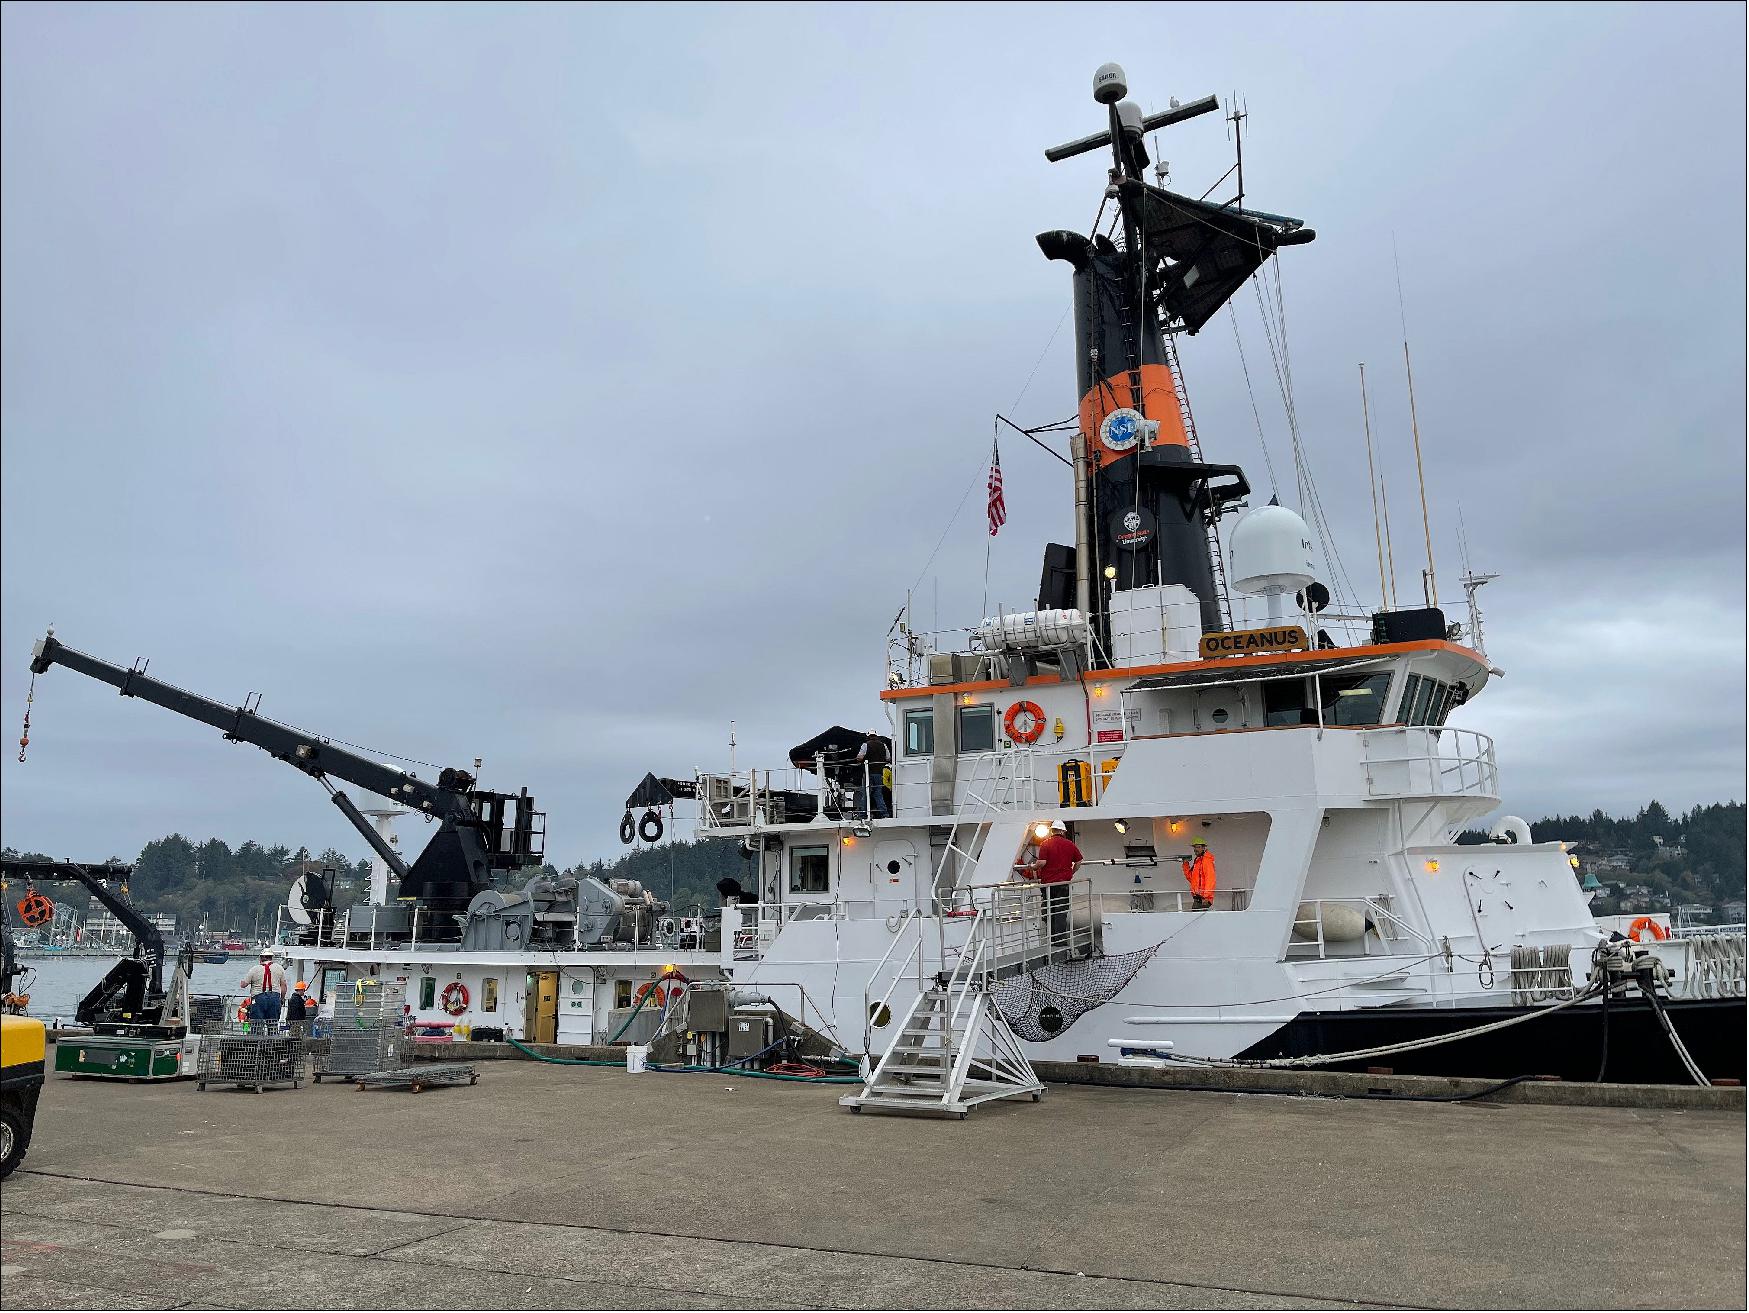 Figure 10: The R/V Oceanus ship docked in Newport, Oregon during S-MODE ship mobilization (image credit: Sommer Nicholas / NASA Ames Research Center)